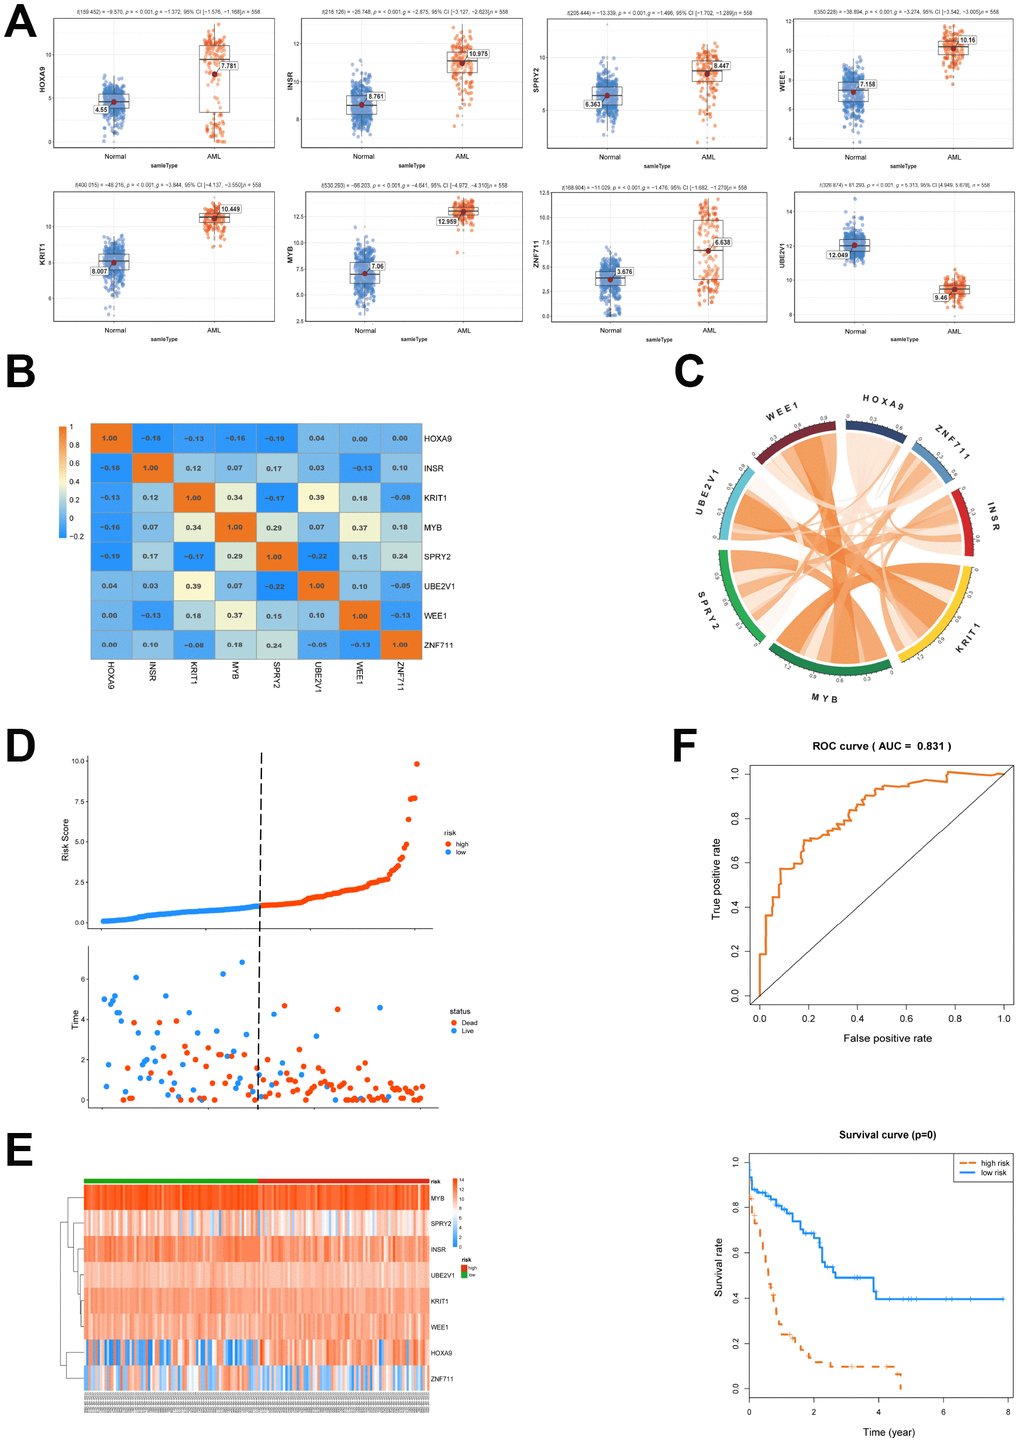 Survival analysis of the 8 genes is conducted. (A) The expression of 8 selected genes between AML and normal samples was shown. (B, C) The expression relationship of the 8 genes was displayed. (D) AML patients were classified into predicted low and high risk groups according to the multivariate cox proportional hazard regression analysis. (E) The expression heatmap of the 8 genes in high risk or low risk group was shown. (F) ROC and Kaplan-Meier survival analysis of the 8- genes model was performed.